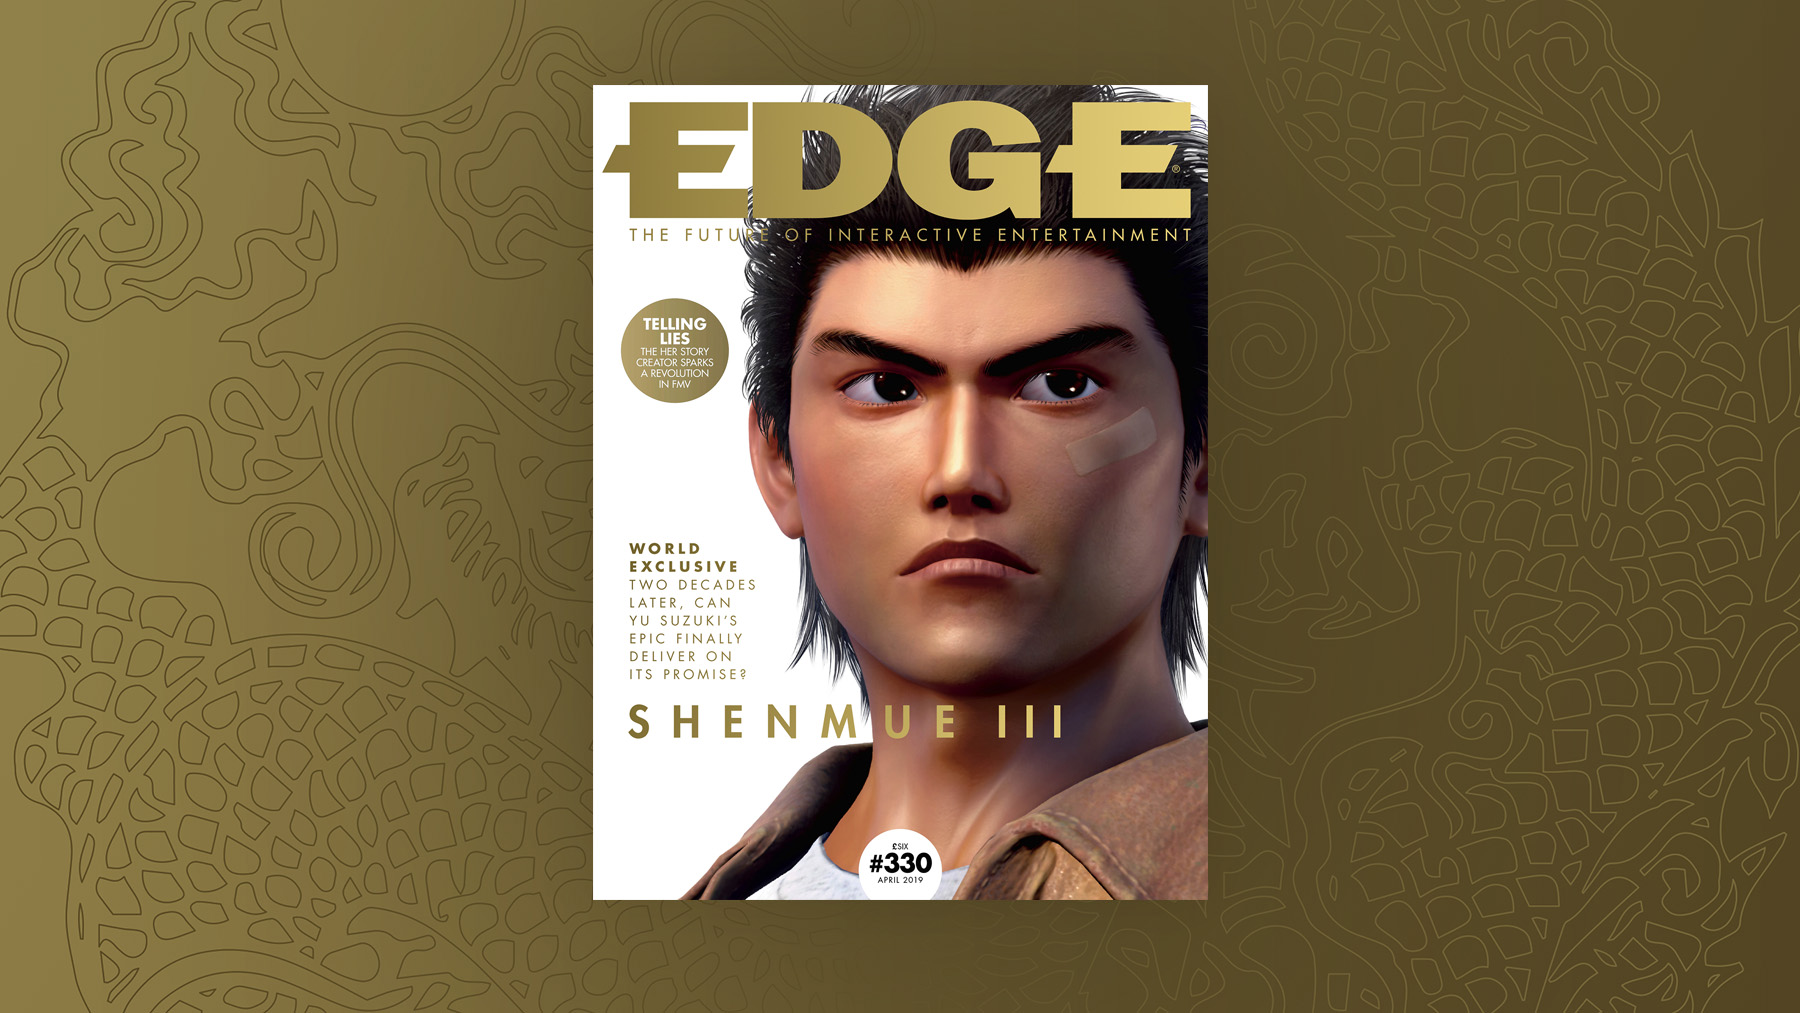 Shenmue 3 reveals new details in world-exclusive Edge cover story